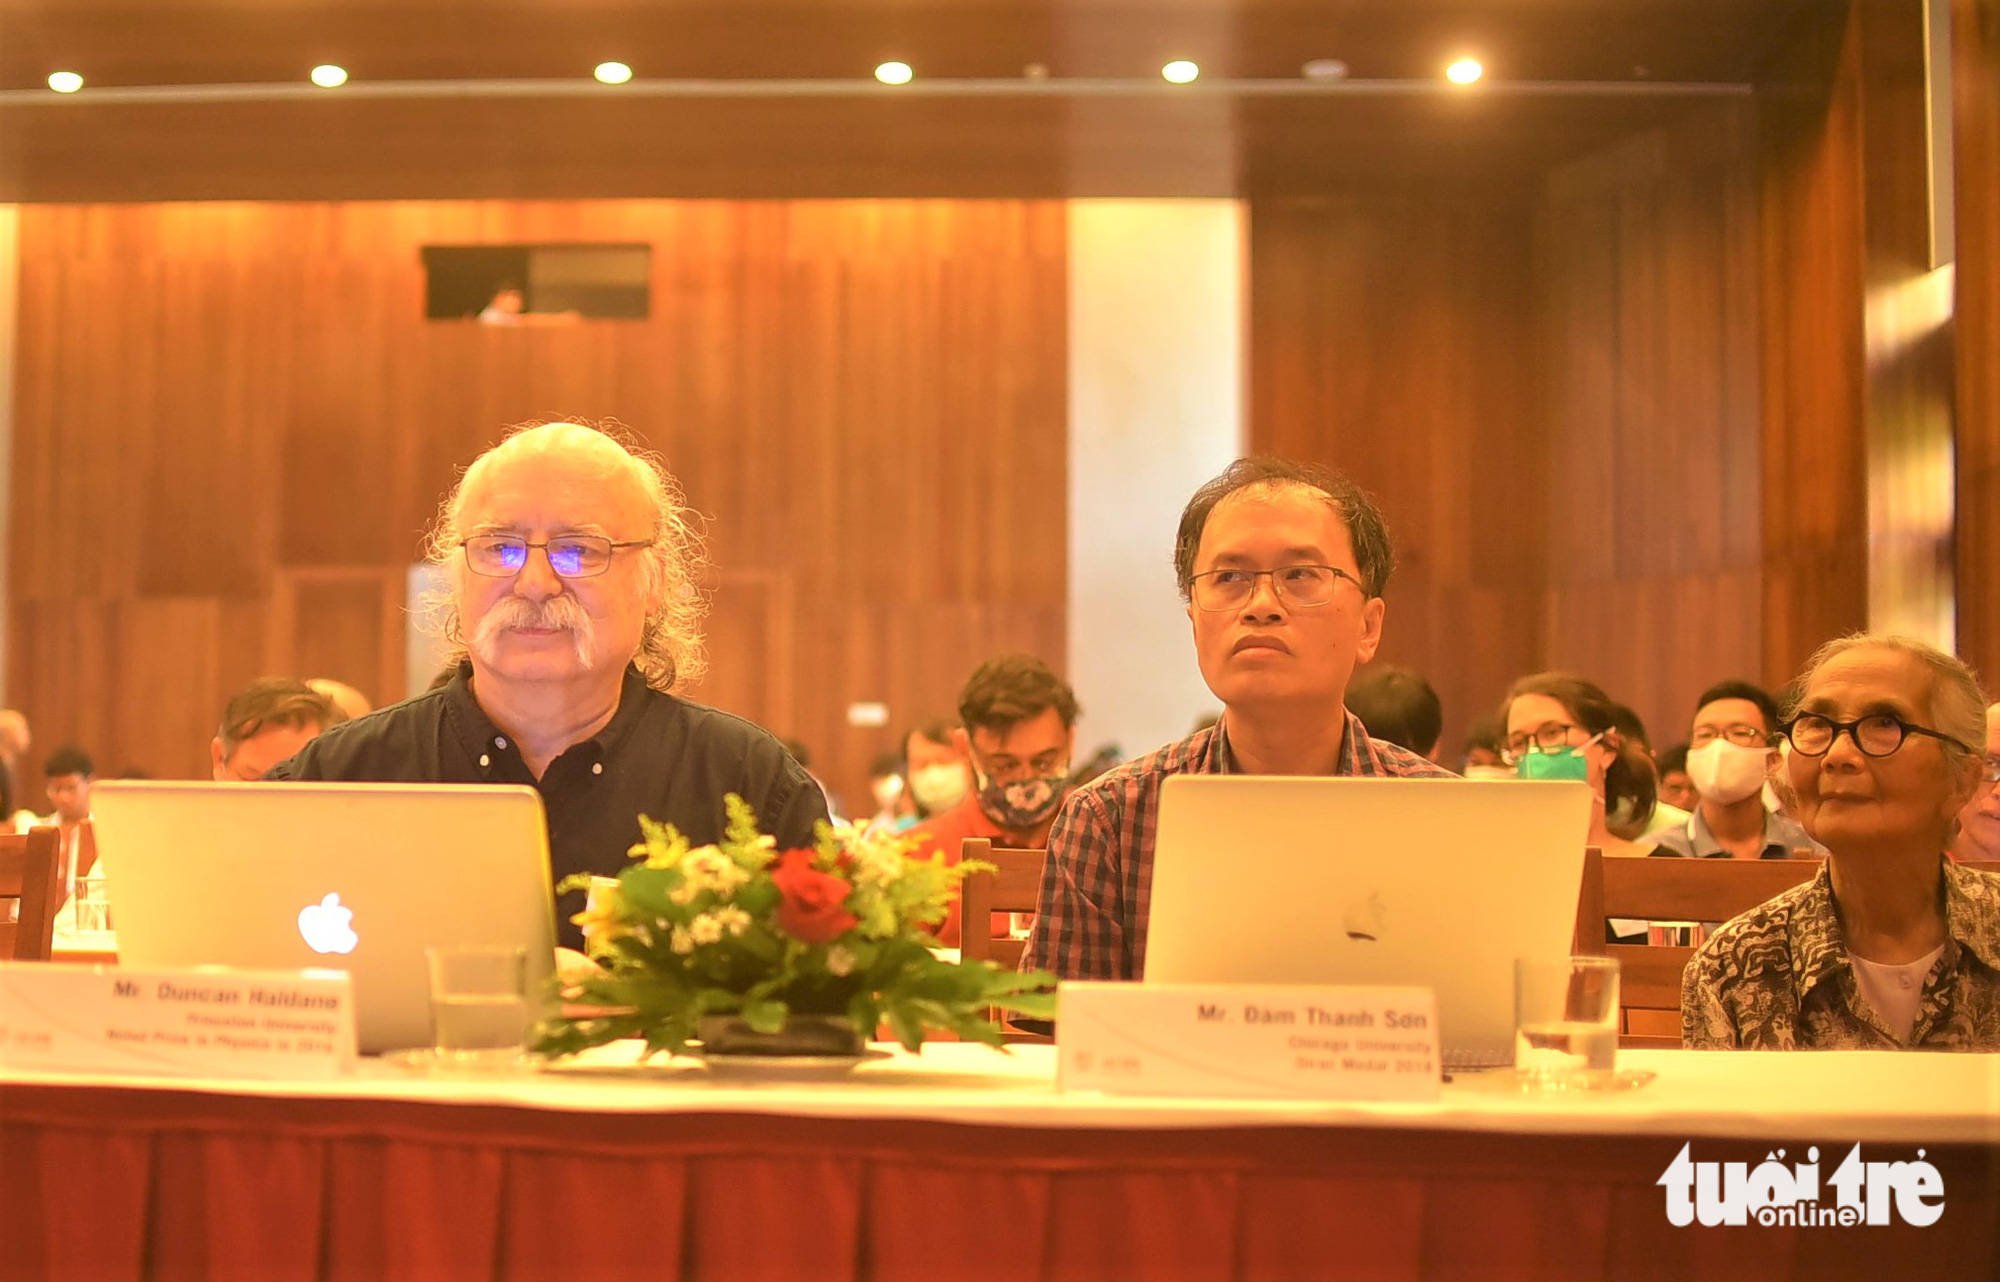 Professor Duncan Haldane (L), who was awarded the 2016 Nobel Prize in Physics, and Professor Dam Thanh Son, a 2018 Dirac medal winner, join a conference at the International Center for Interdisciplinary Science and Education in Quy Nhon City, Binh Dinh Province, central Vietnam. Photo: Lam Thien / Tuoi Tre